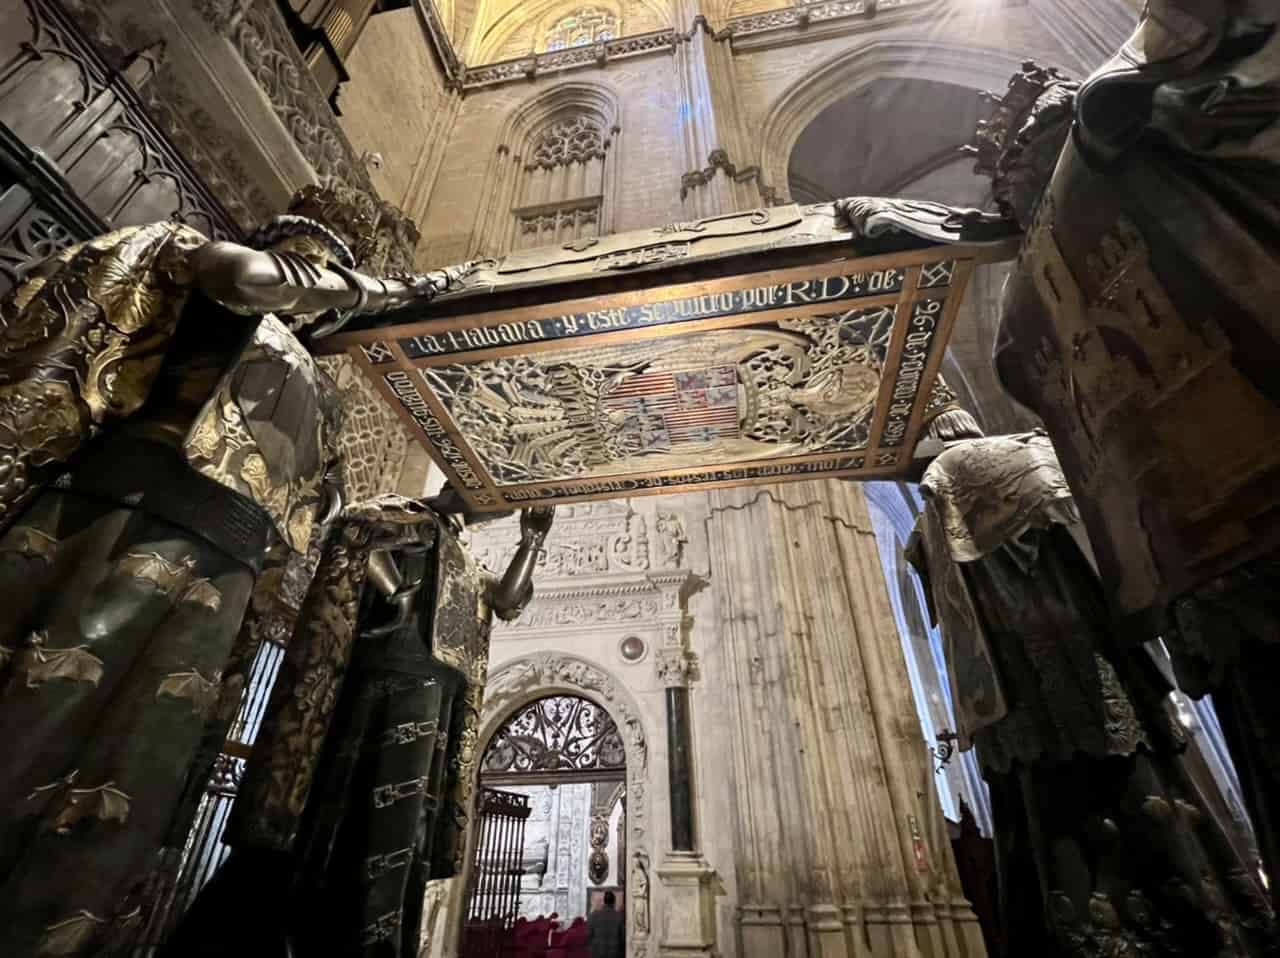 Columbus' tomb held aloft by four figures representing the 4 kingdoms of Spain